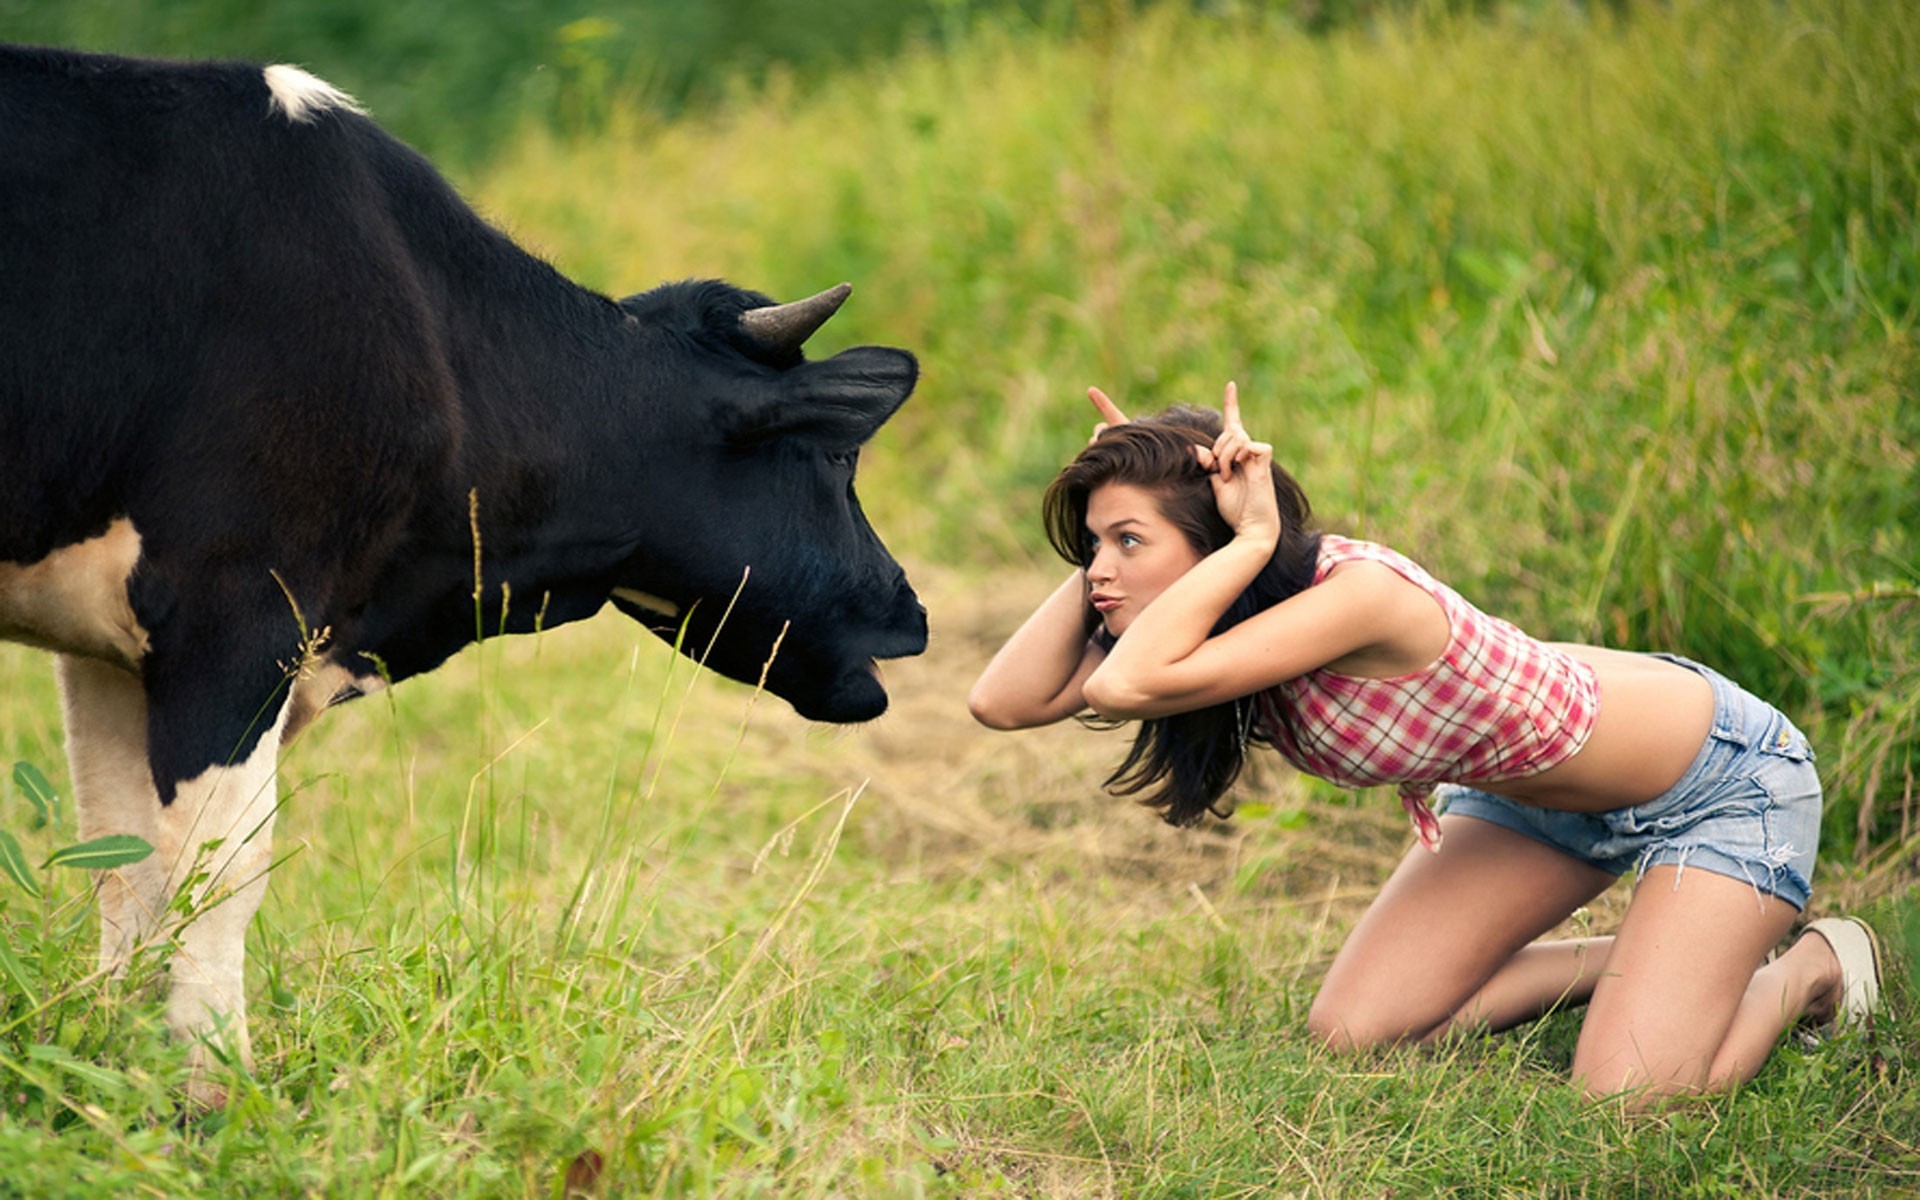 People 1920x1200 women jean shorts women outdoors cow belly fingers plaid plaid shirt humor animals mammals bent over grass plants 500px